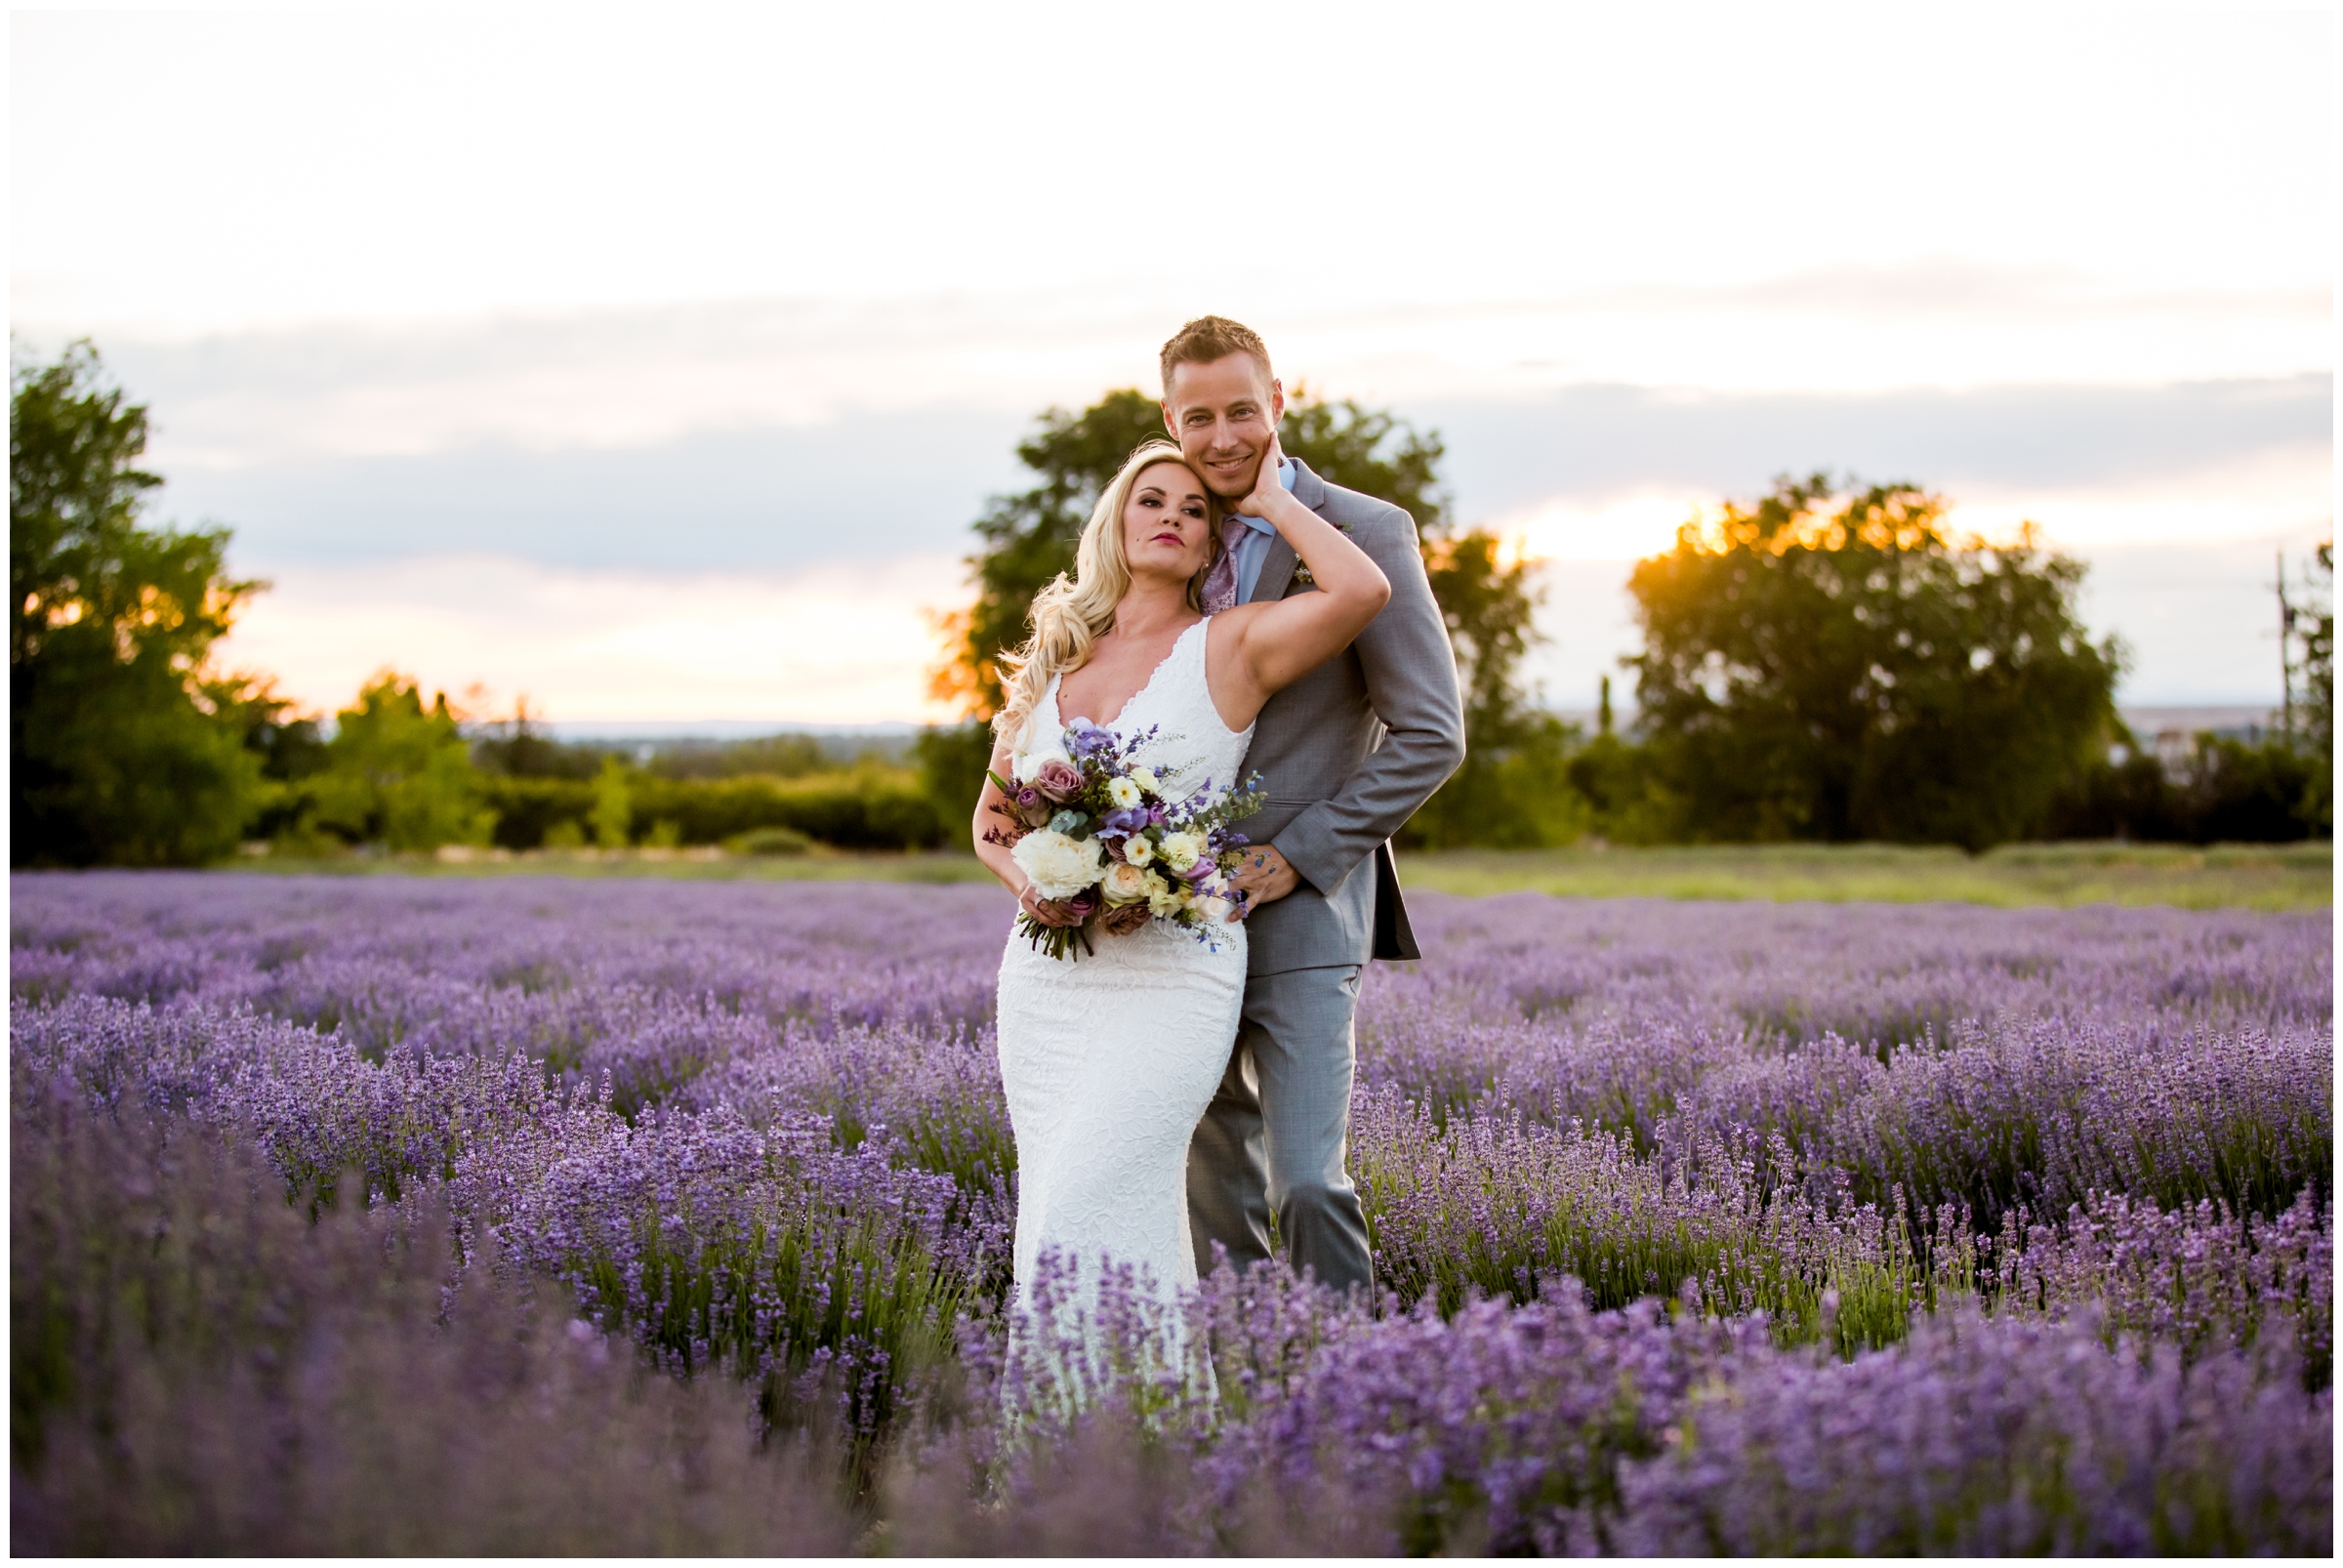 Grand Junction elopement photography inspiration at Sage Creations lavender field